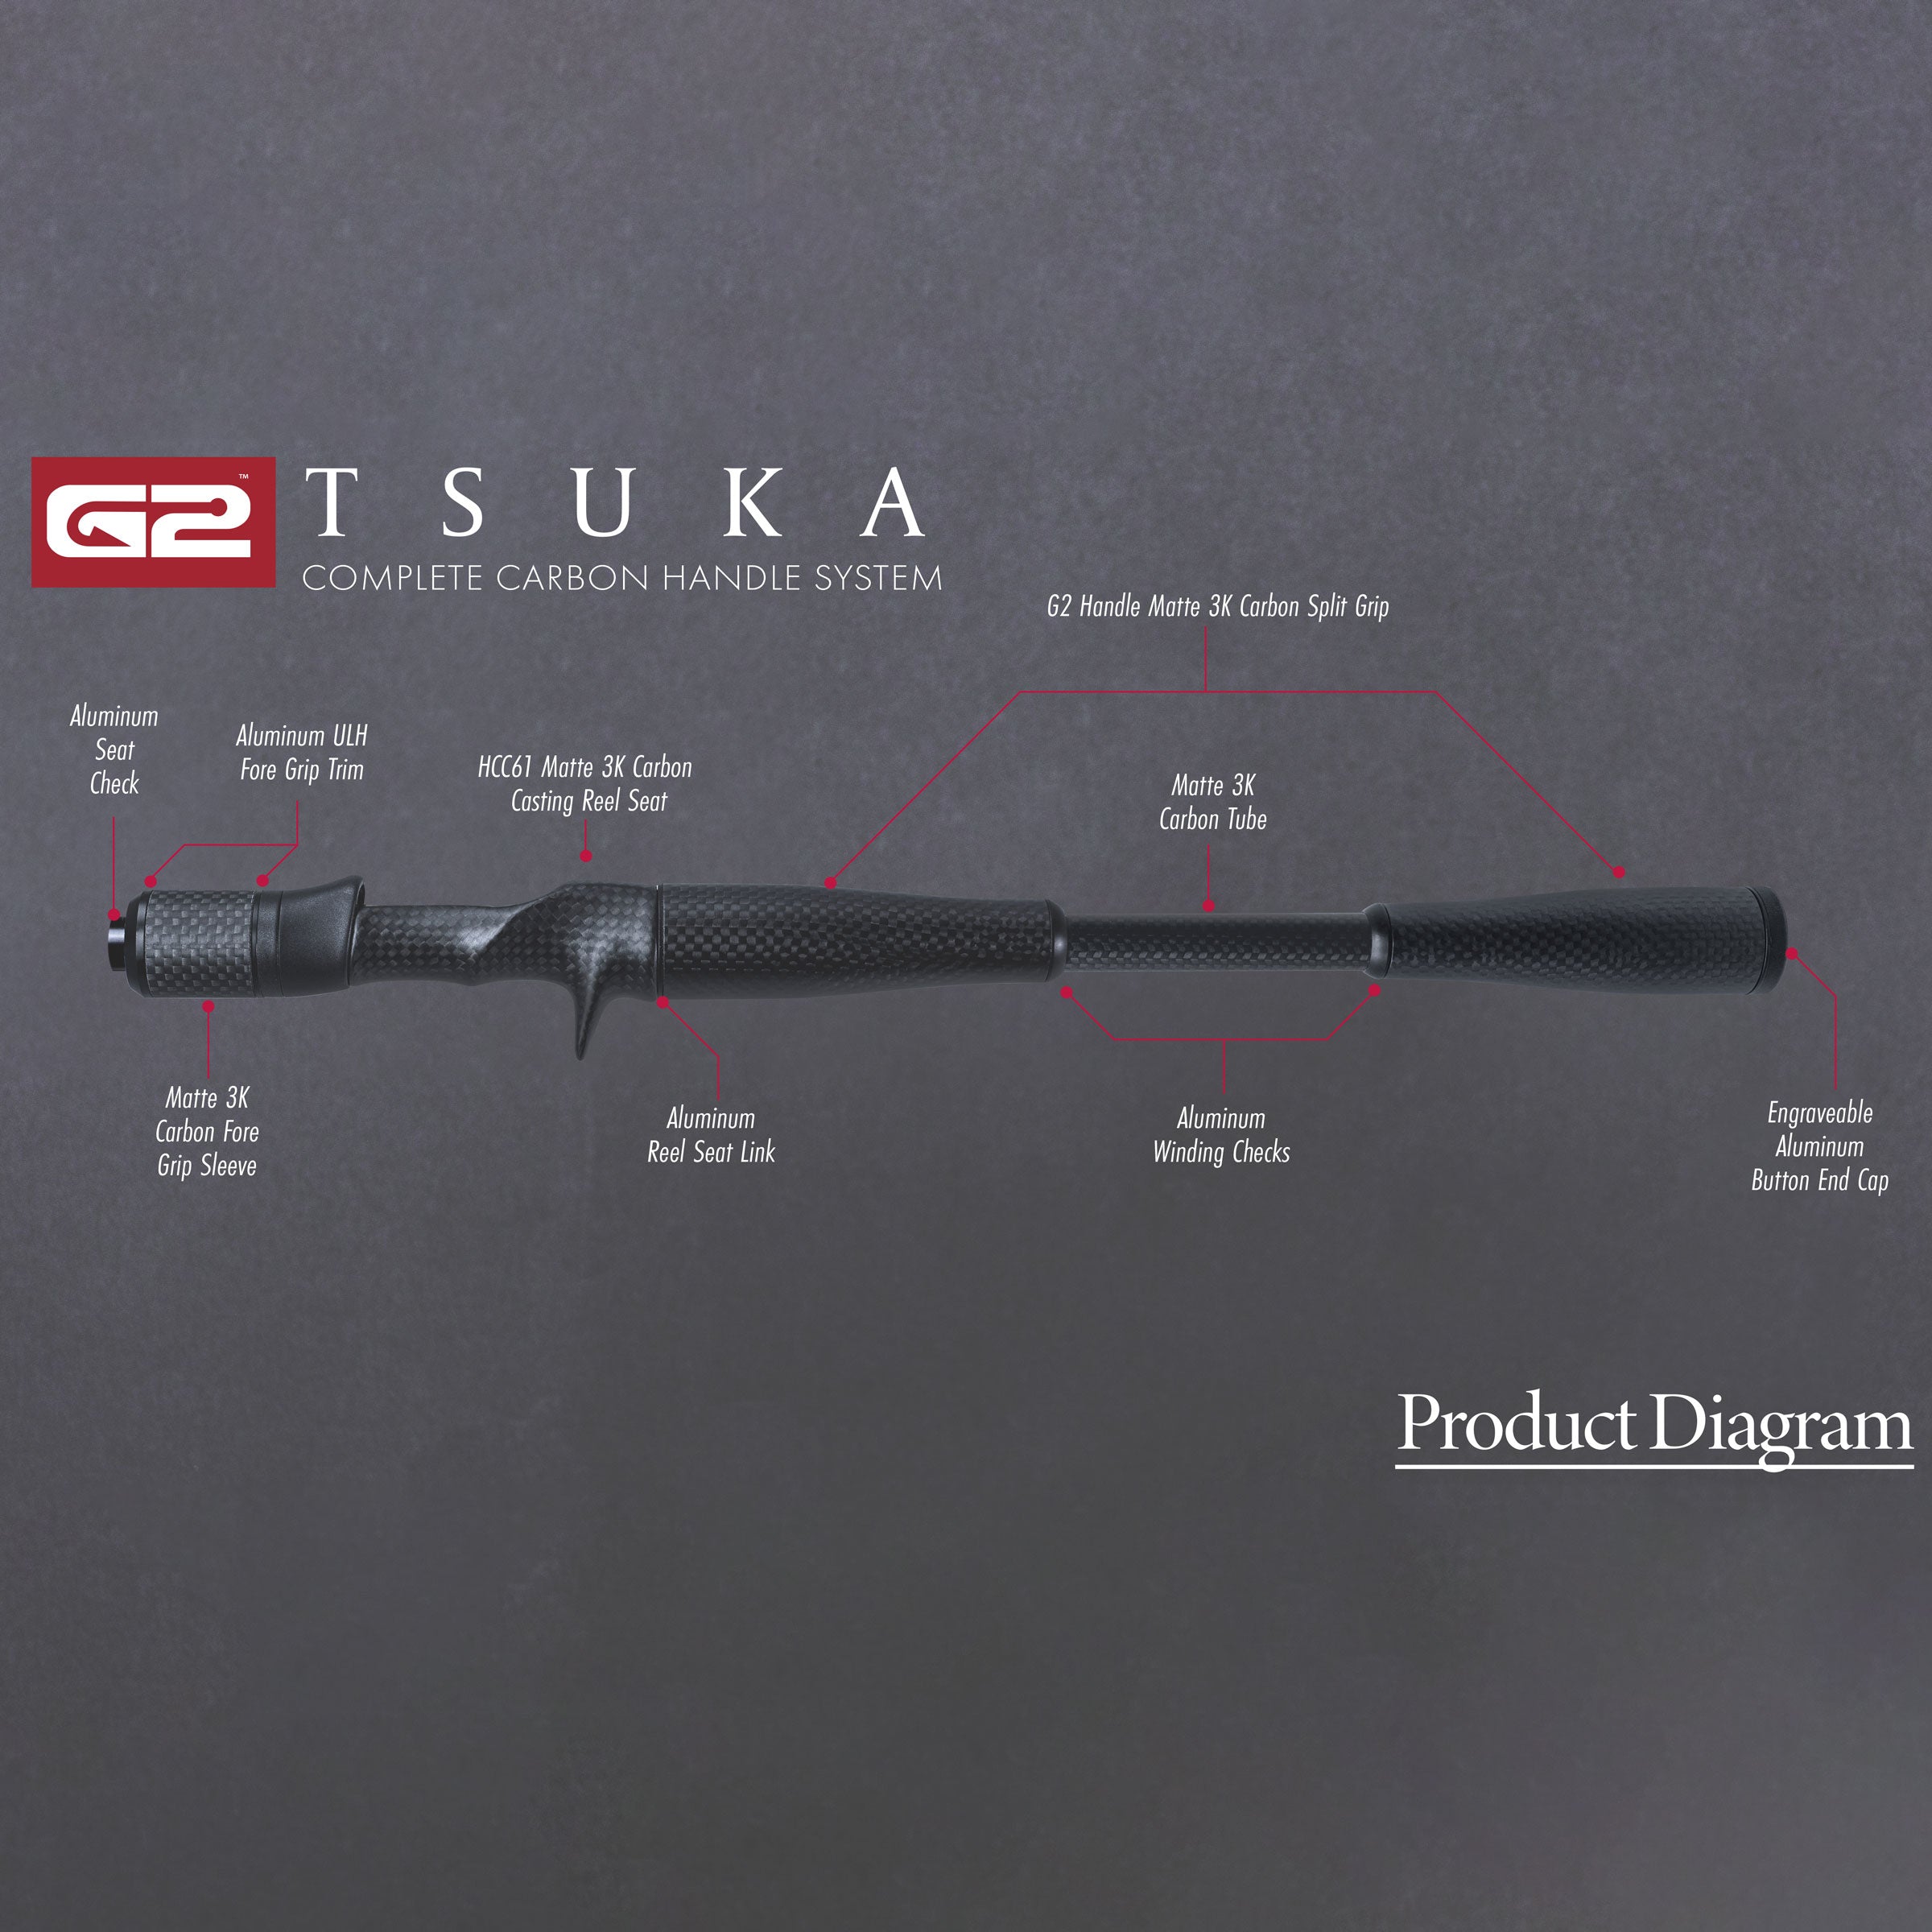 G2 Tsuka Carbon Handle System Kit for Casting Rods